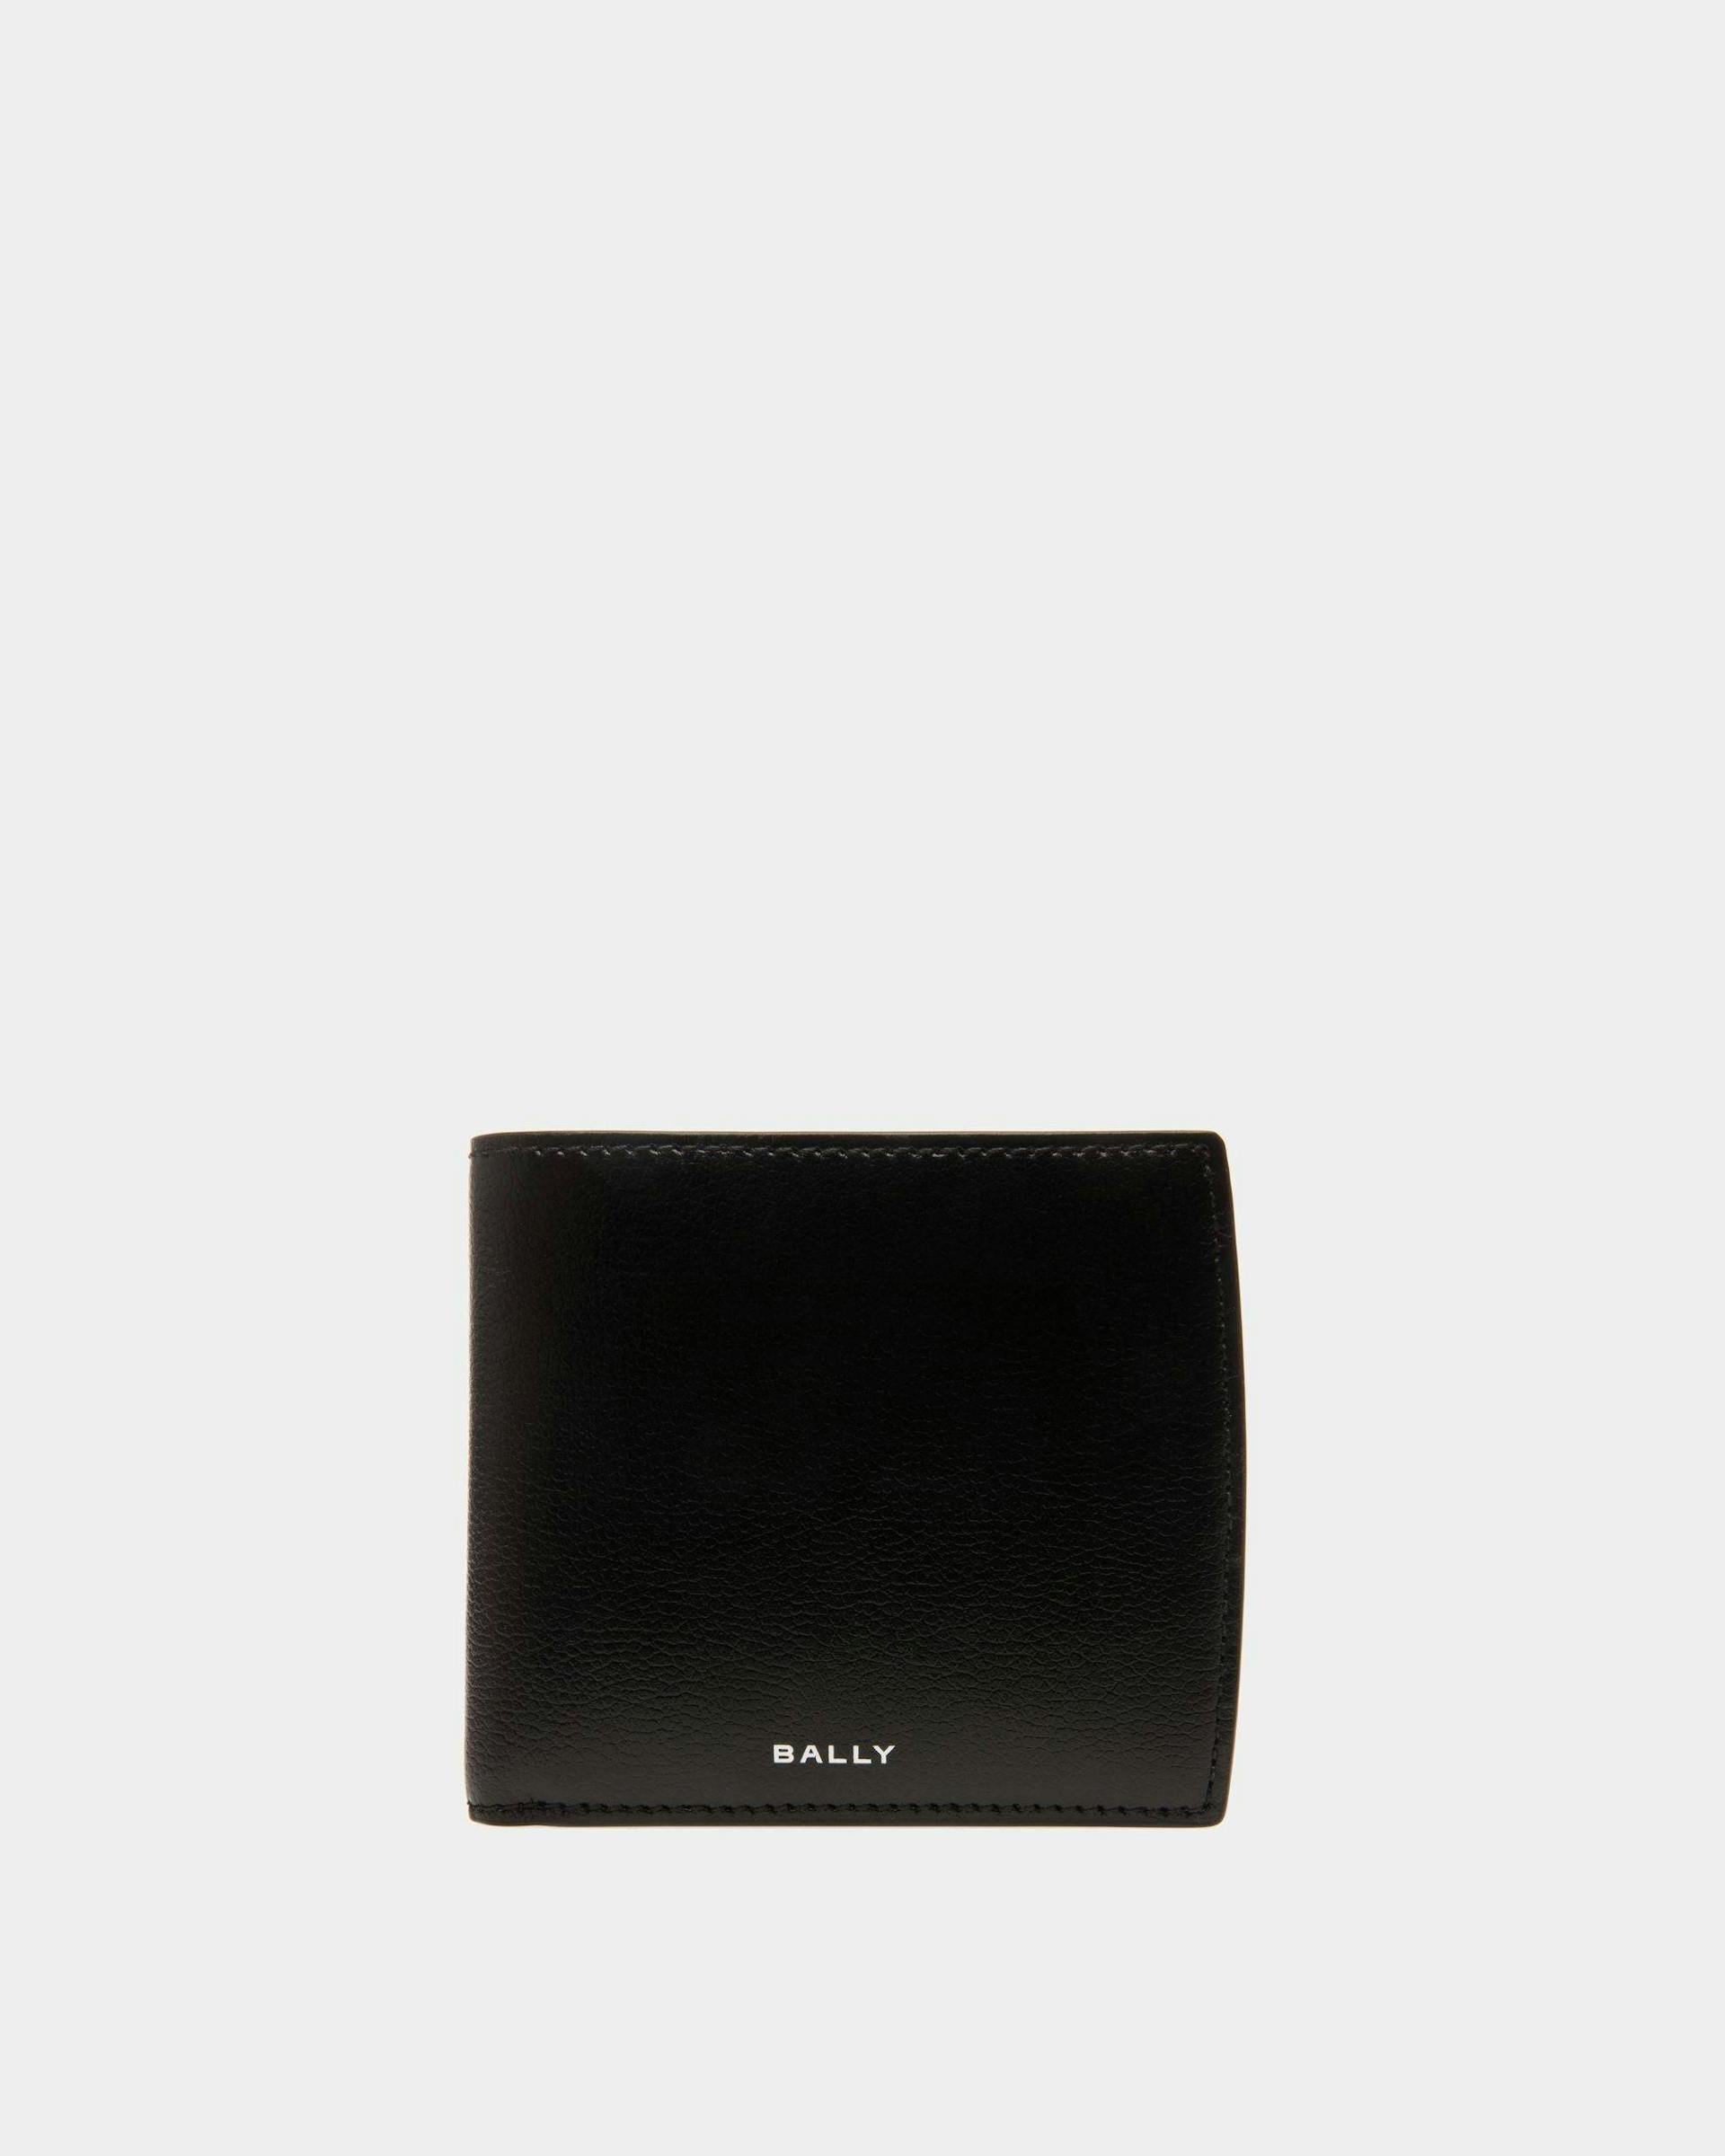 Men's Banque Wallet In Black Leather | Bally | Still Life Front